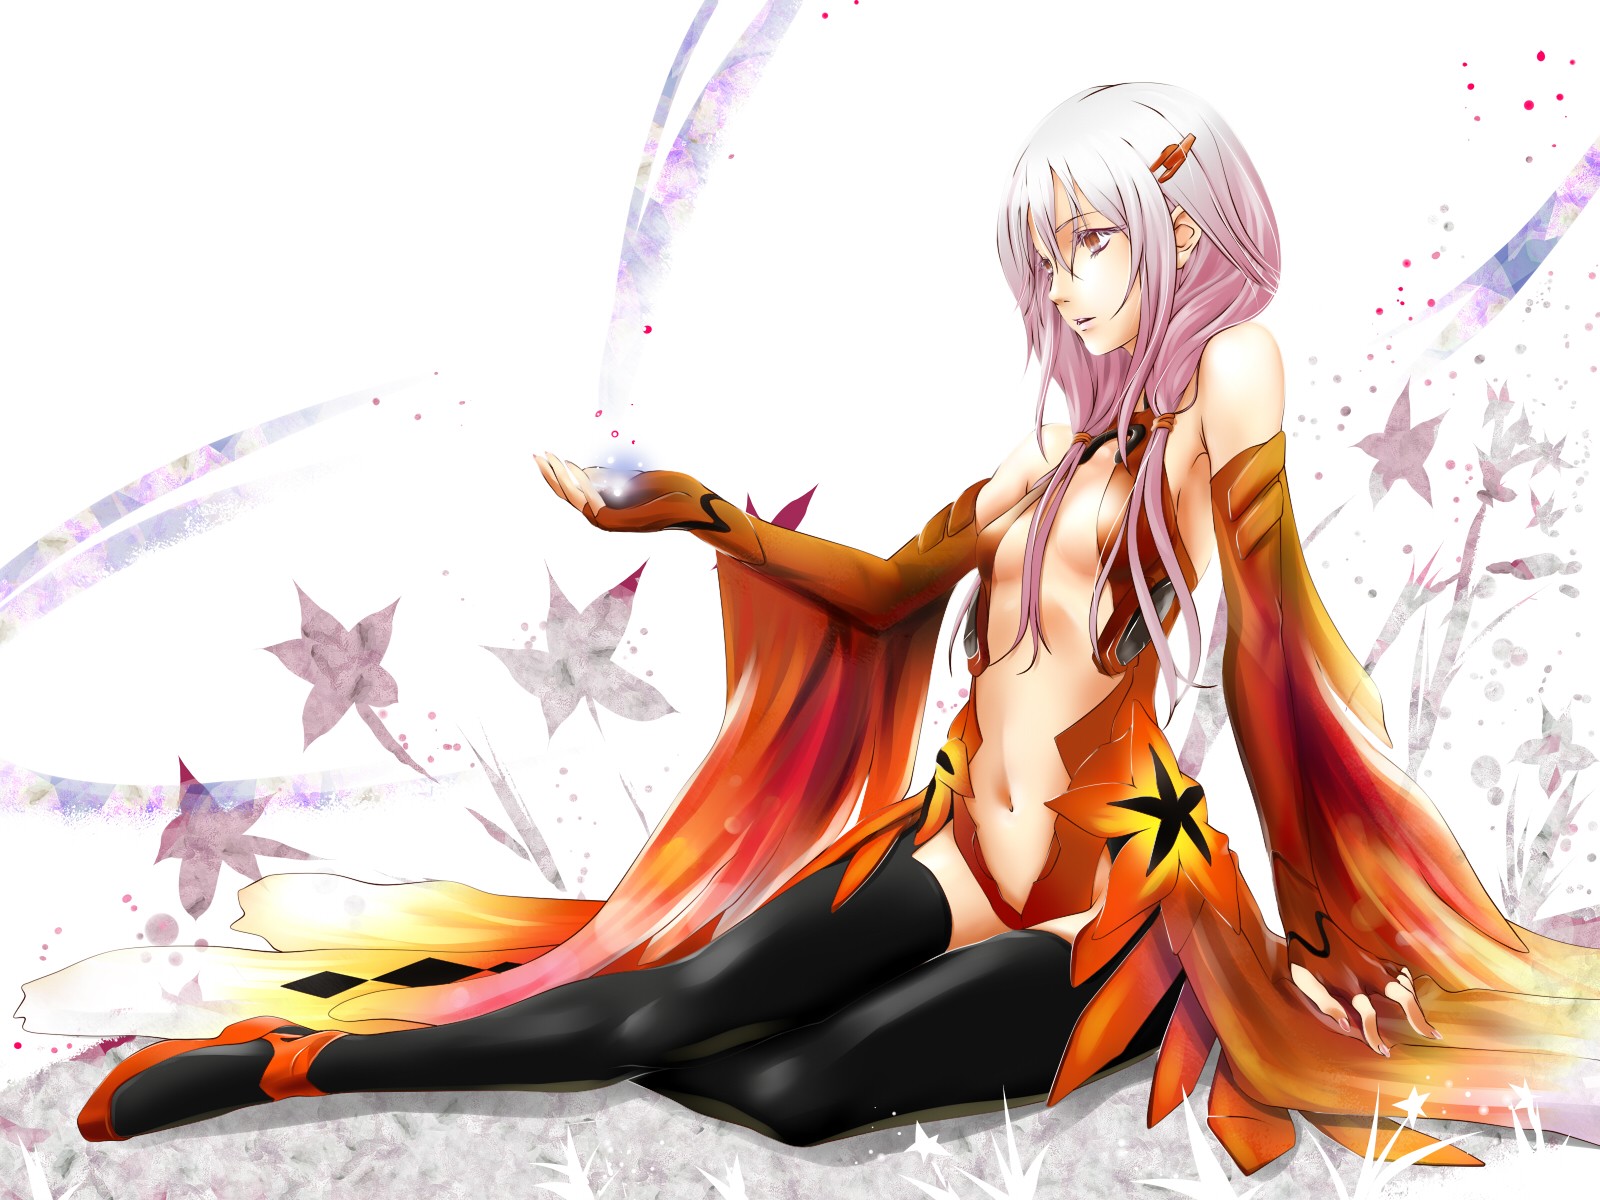 guilty crown english download free